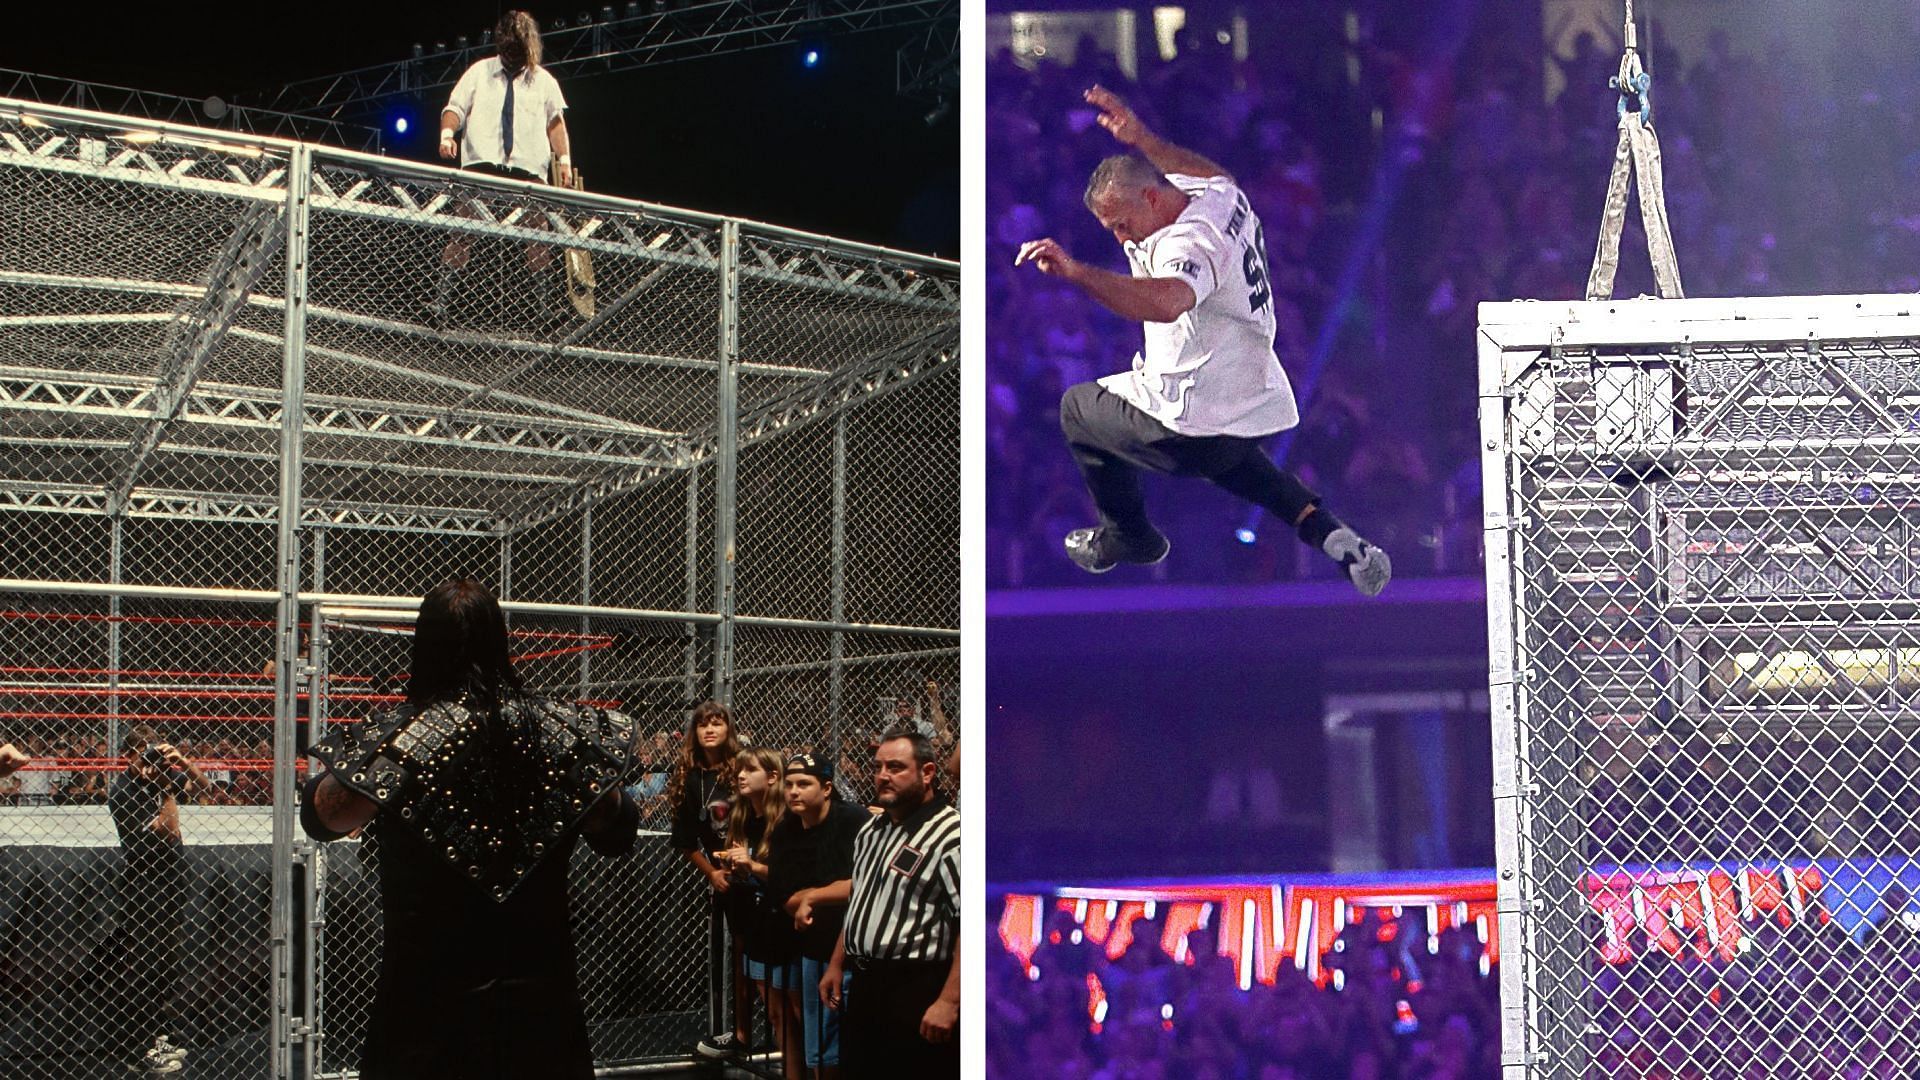 The Hell in a Cell structure is feared by WWE Superstars